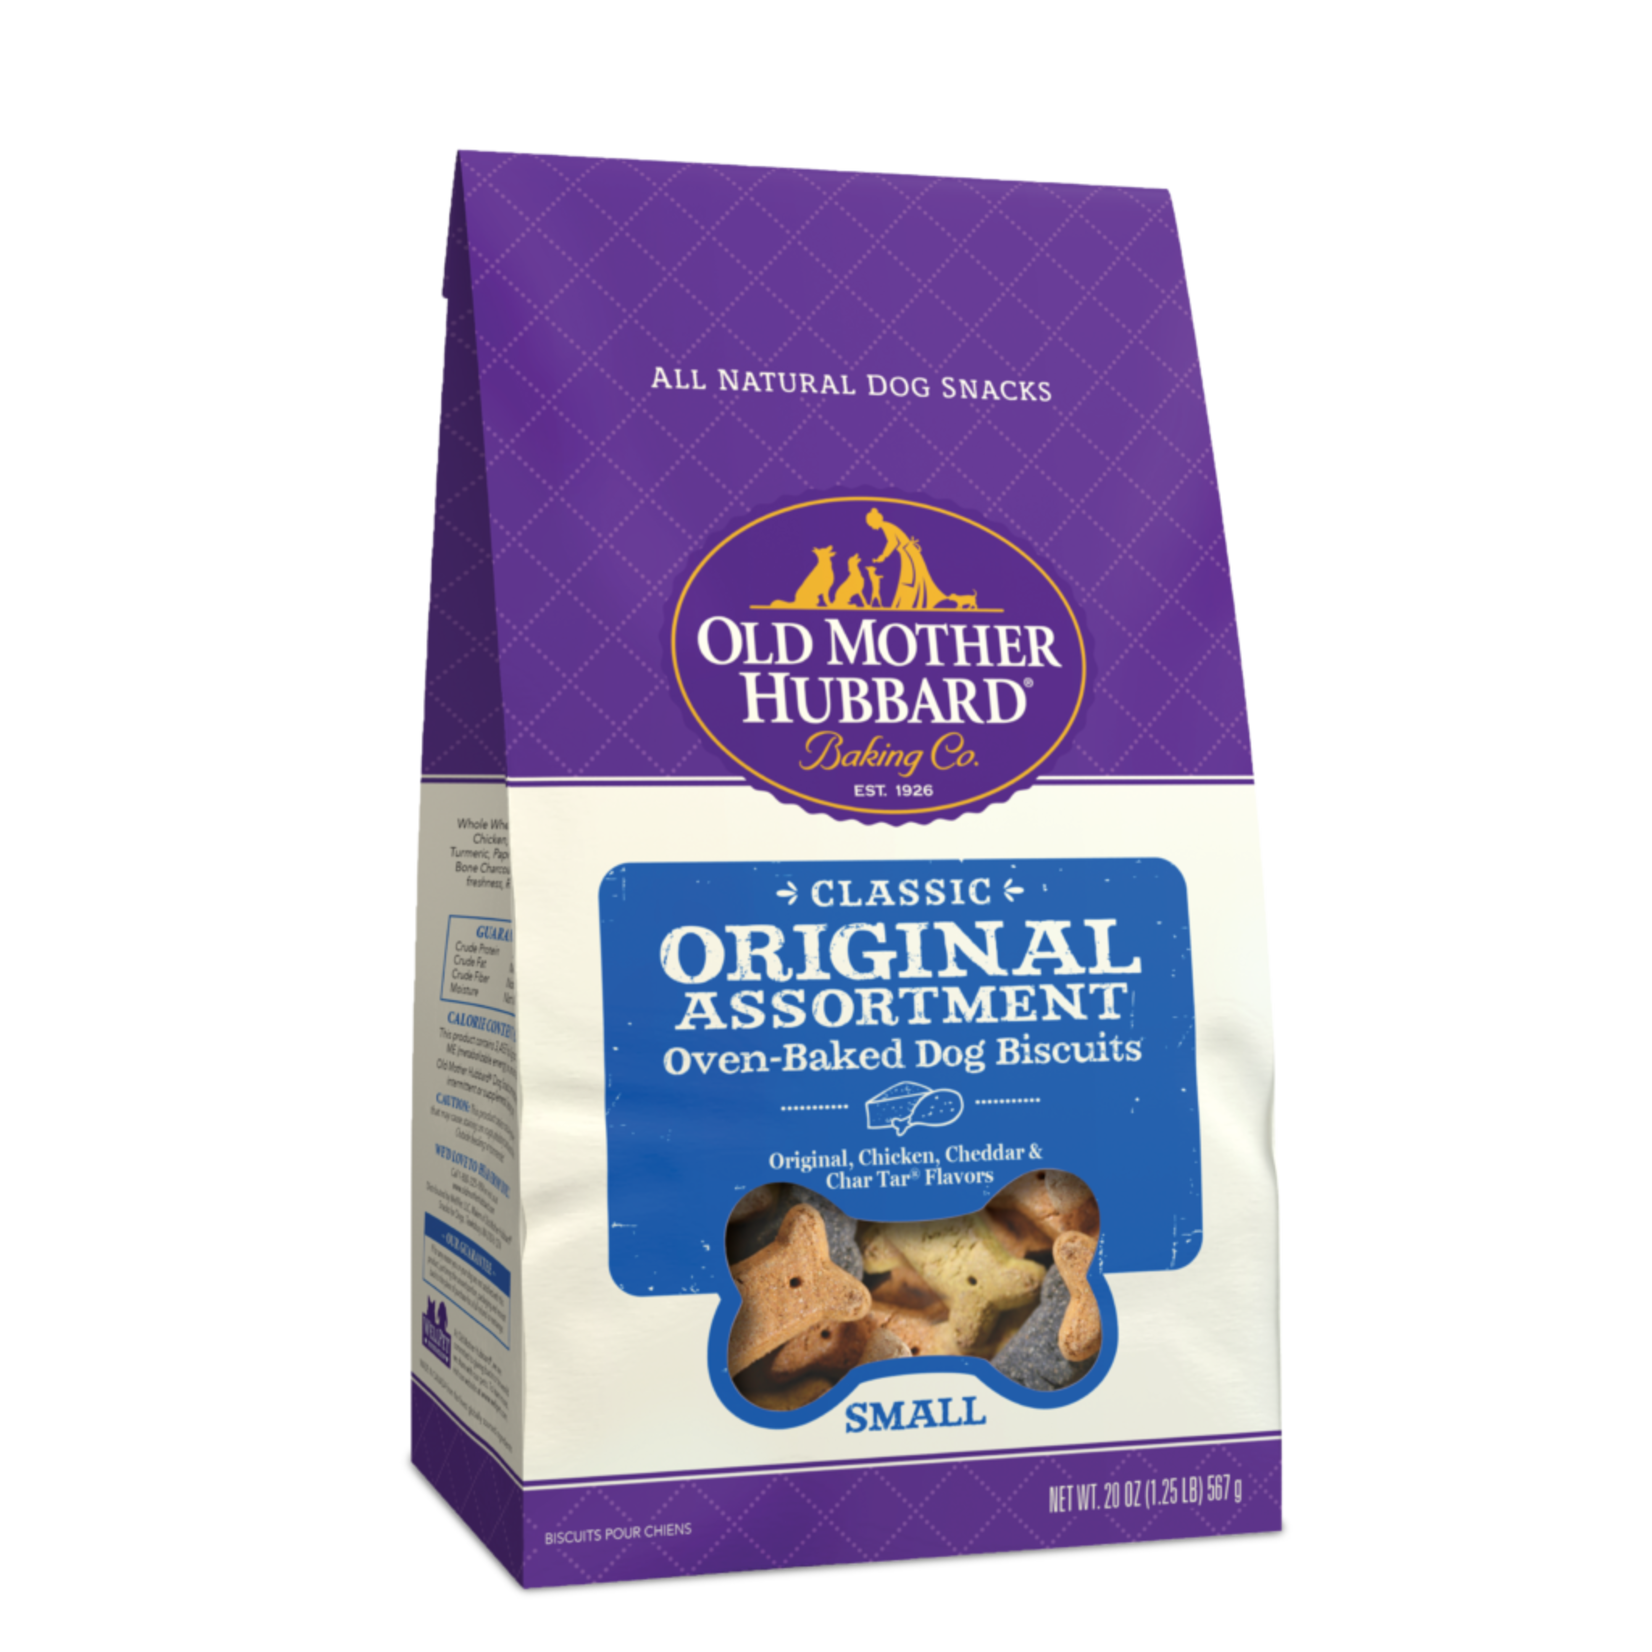 Old Mother Hubbard Old Mother Hubbard Classic Original Assortment Oven Baked Dog Biscuits Small 3lbs - Original, Chicken, Cheddar, Char-Tar